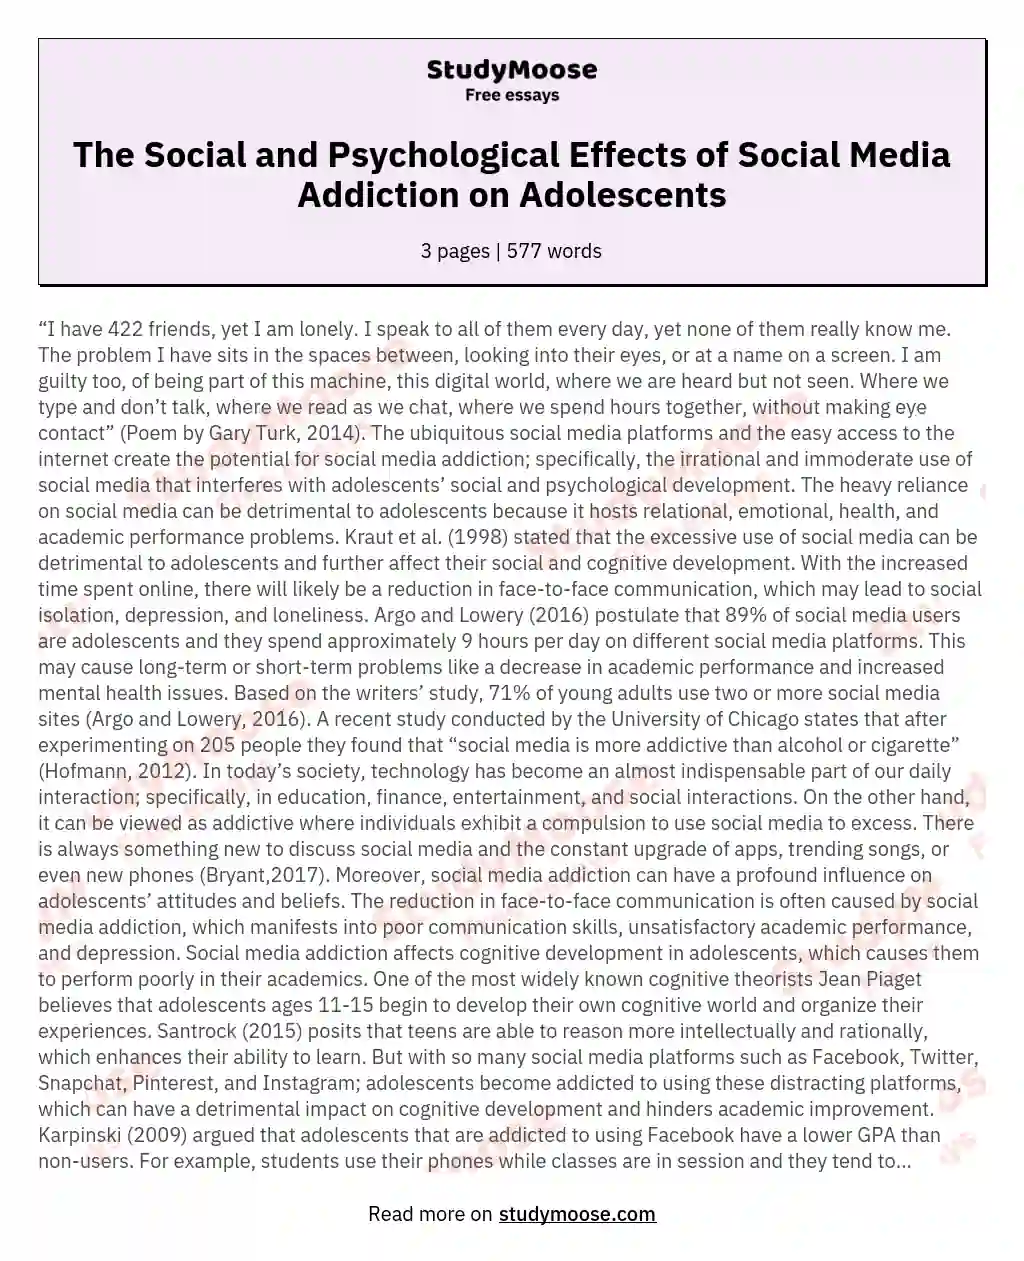 The Social and Psychological Effects of Social Media Addiction on Adolescents essay